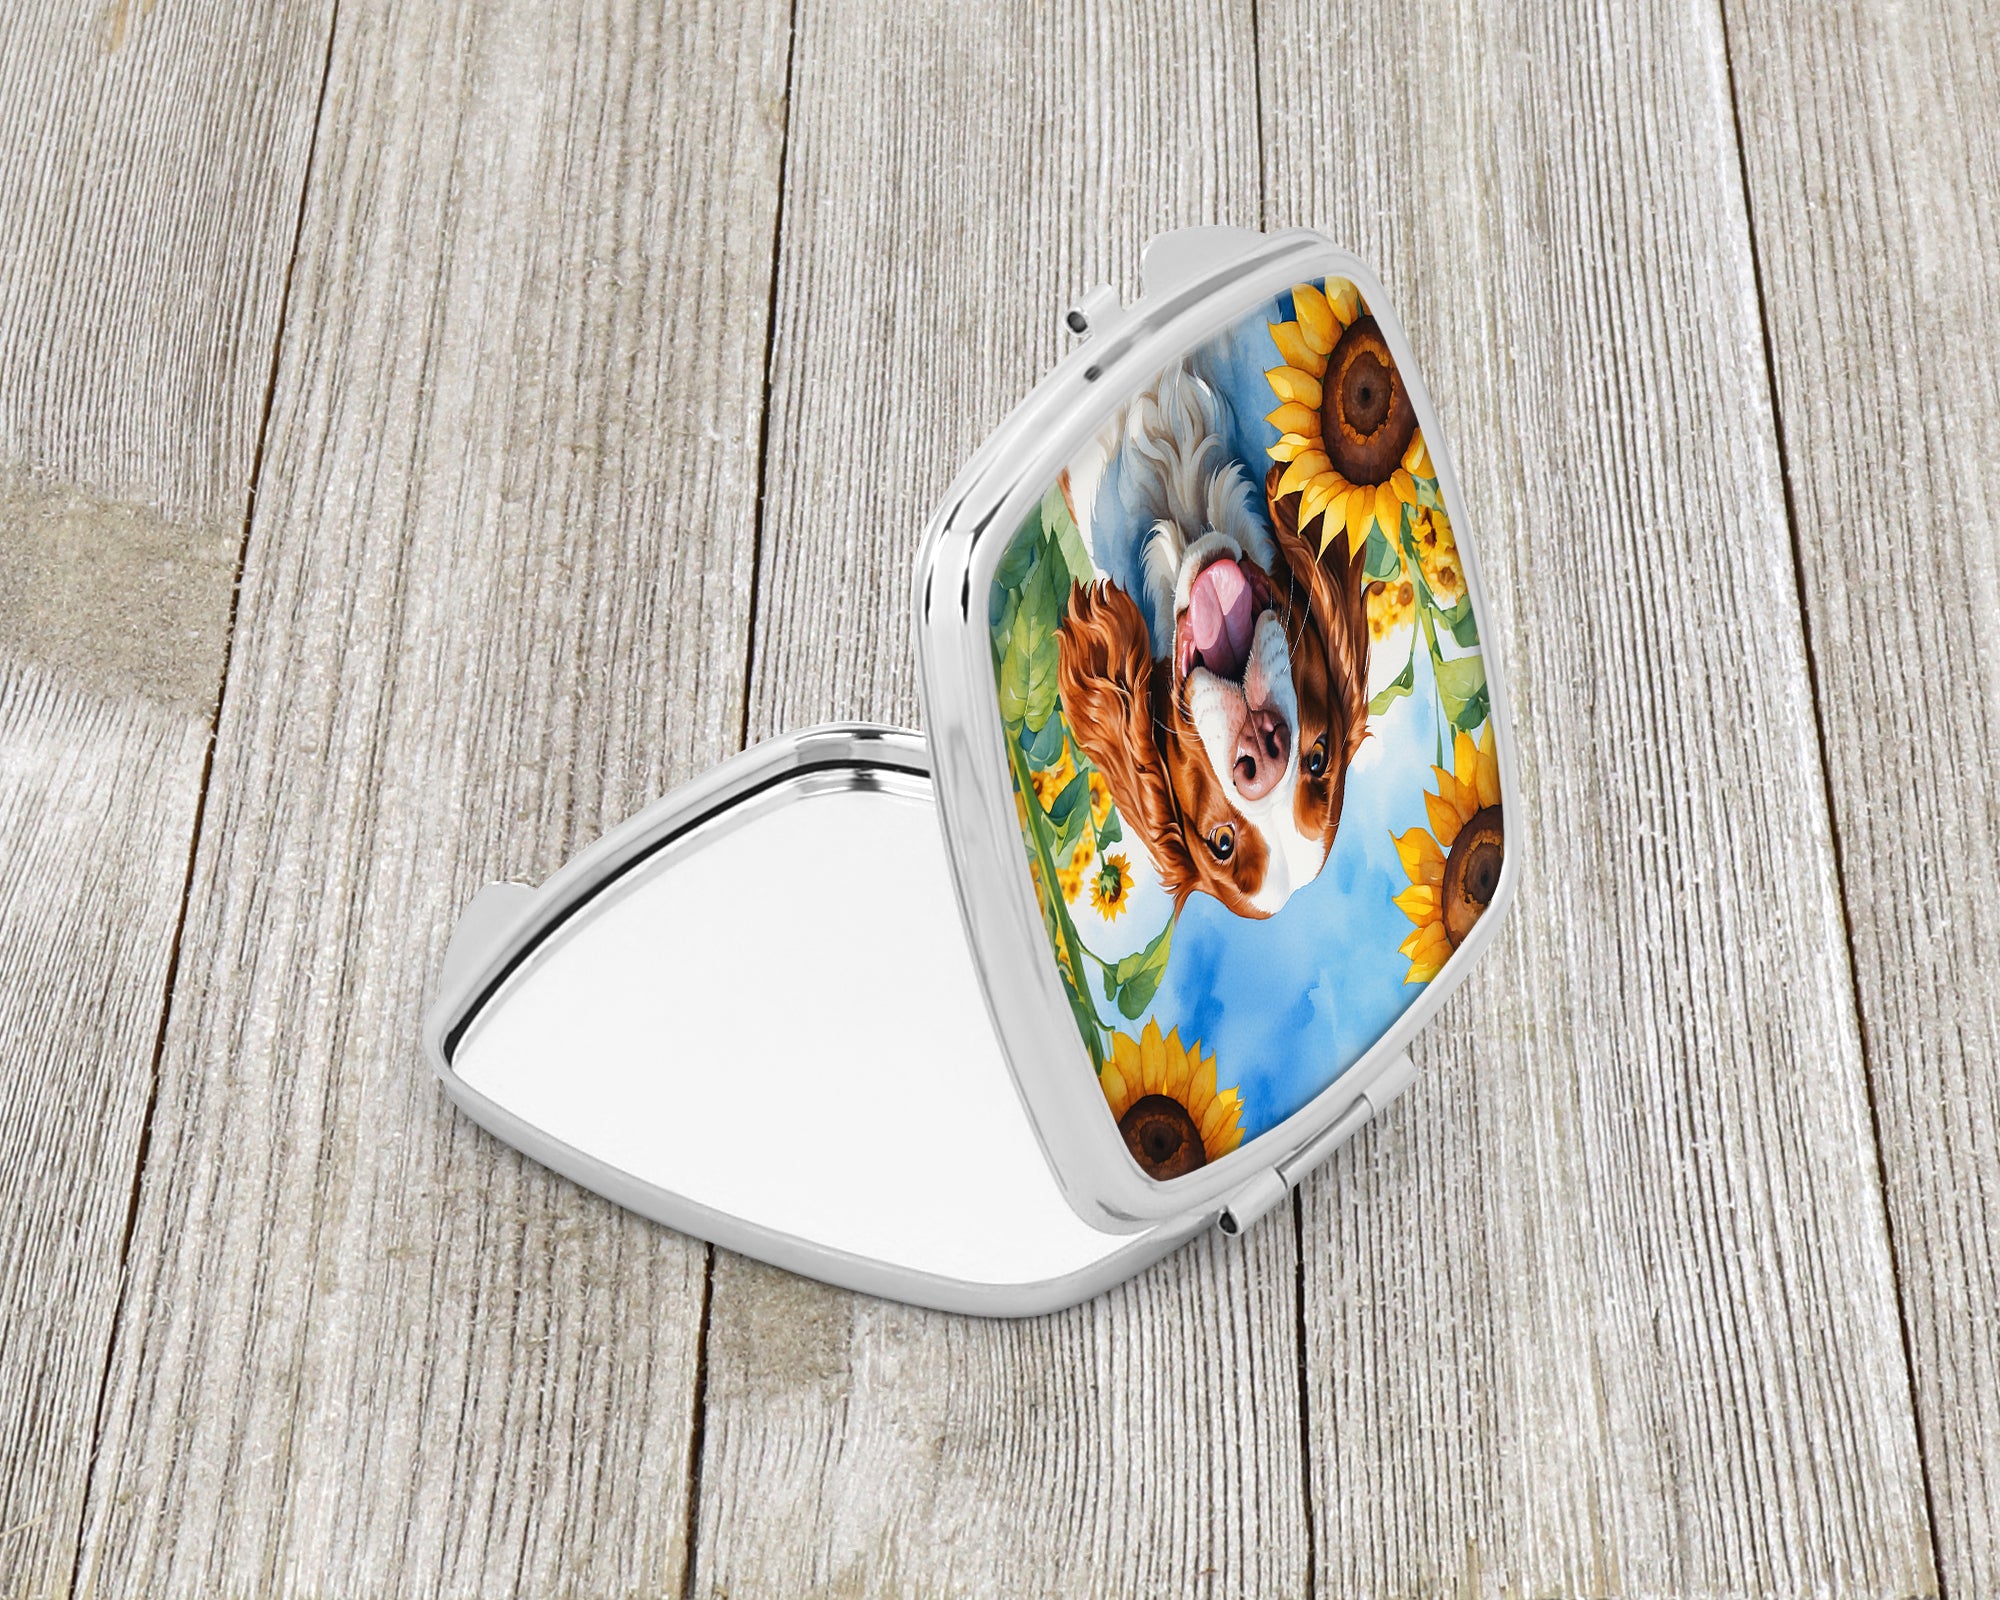 Buy this Welsh Springer Spaniel in Sunflowers Compact Mirror